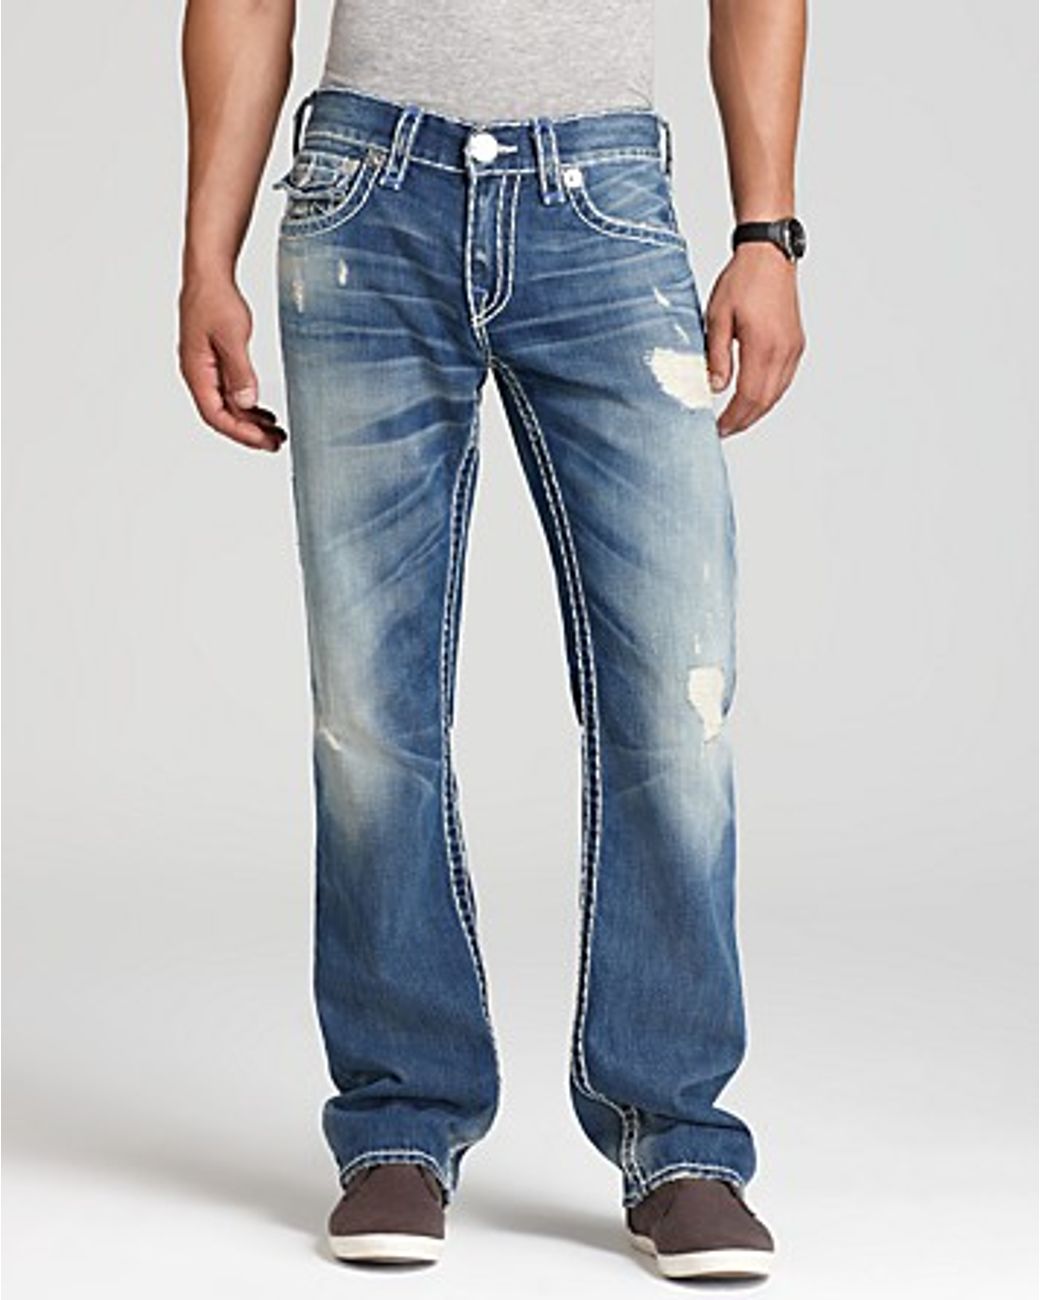 True Religion Jeans Ricky Super T Straight Fit in Old Country in Blue ...